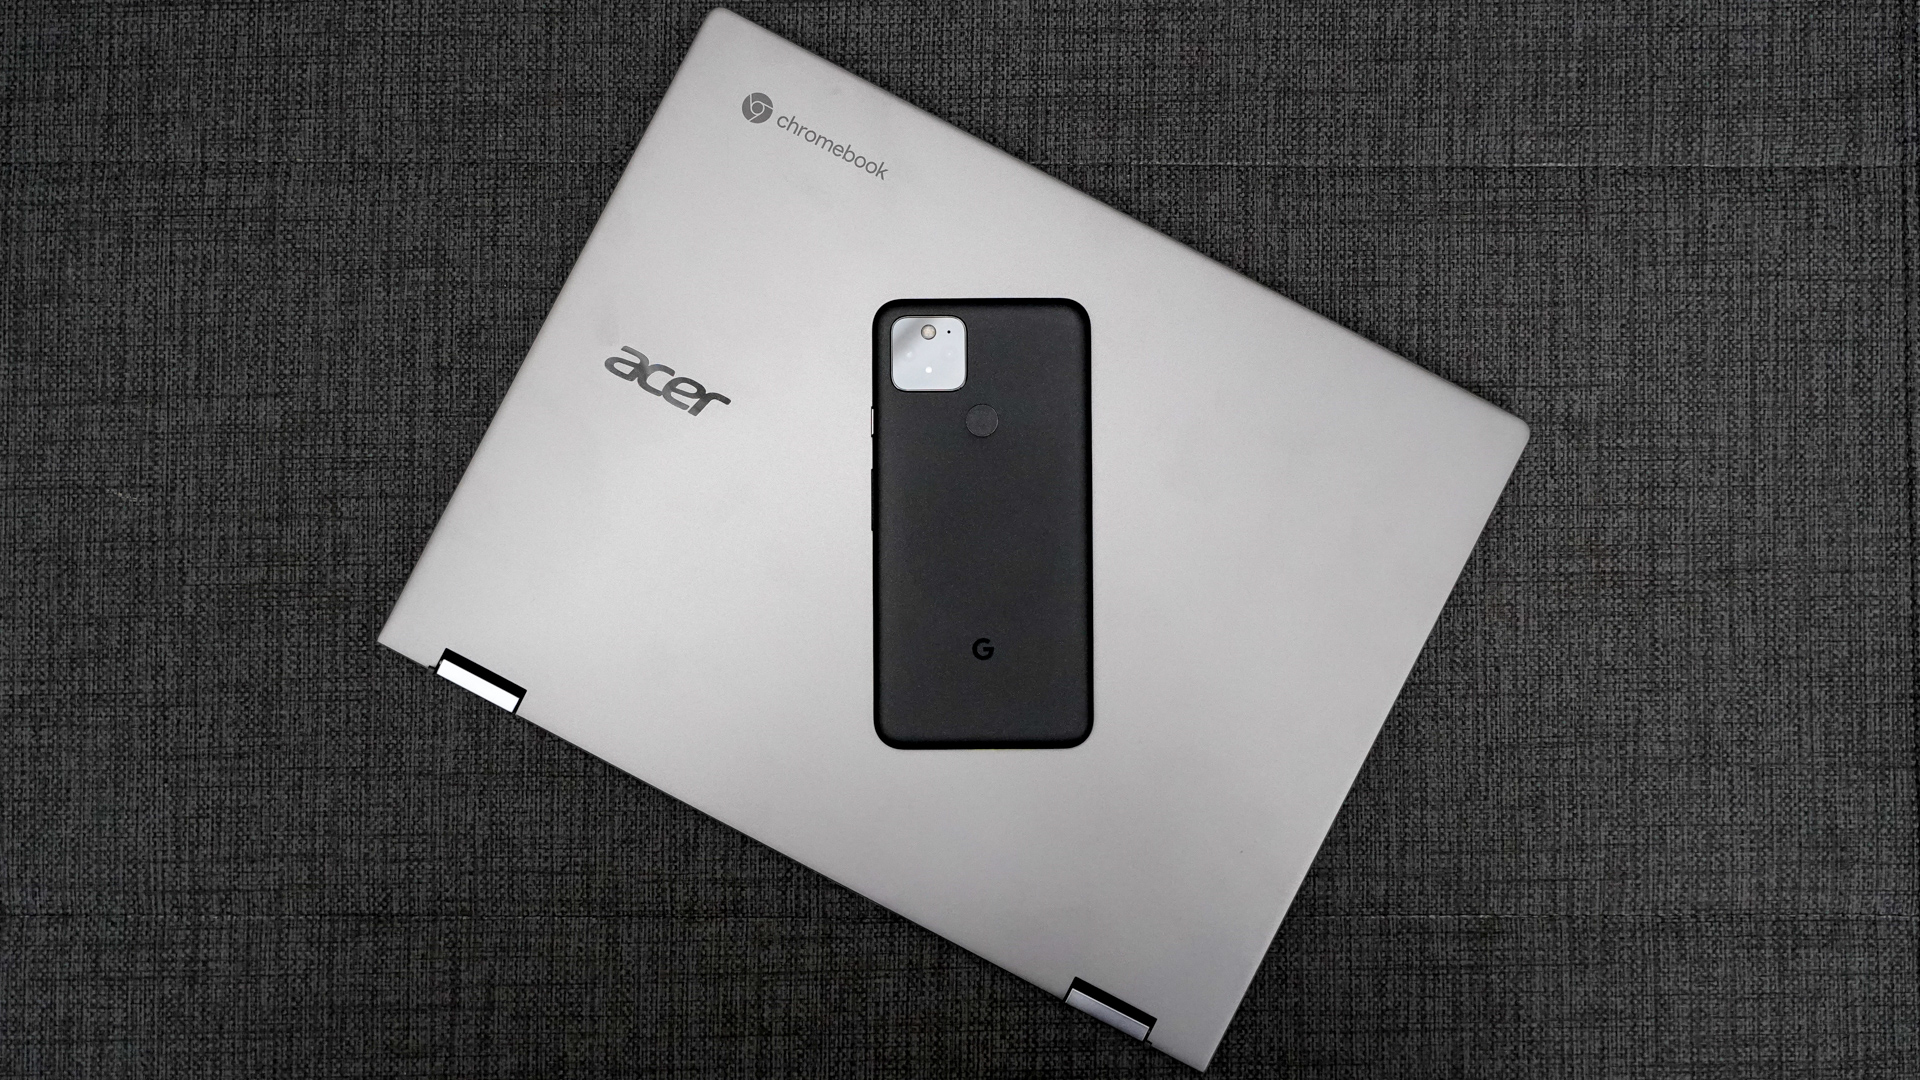 Acer Chromebook Spin 713 with phone